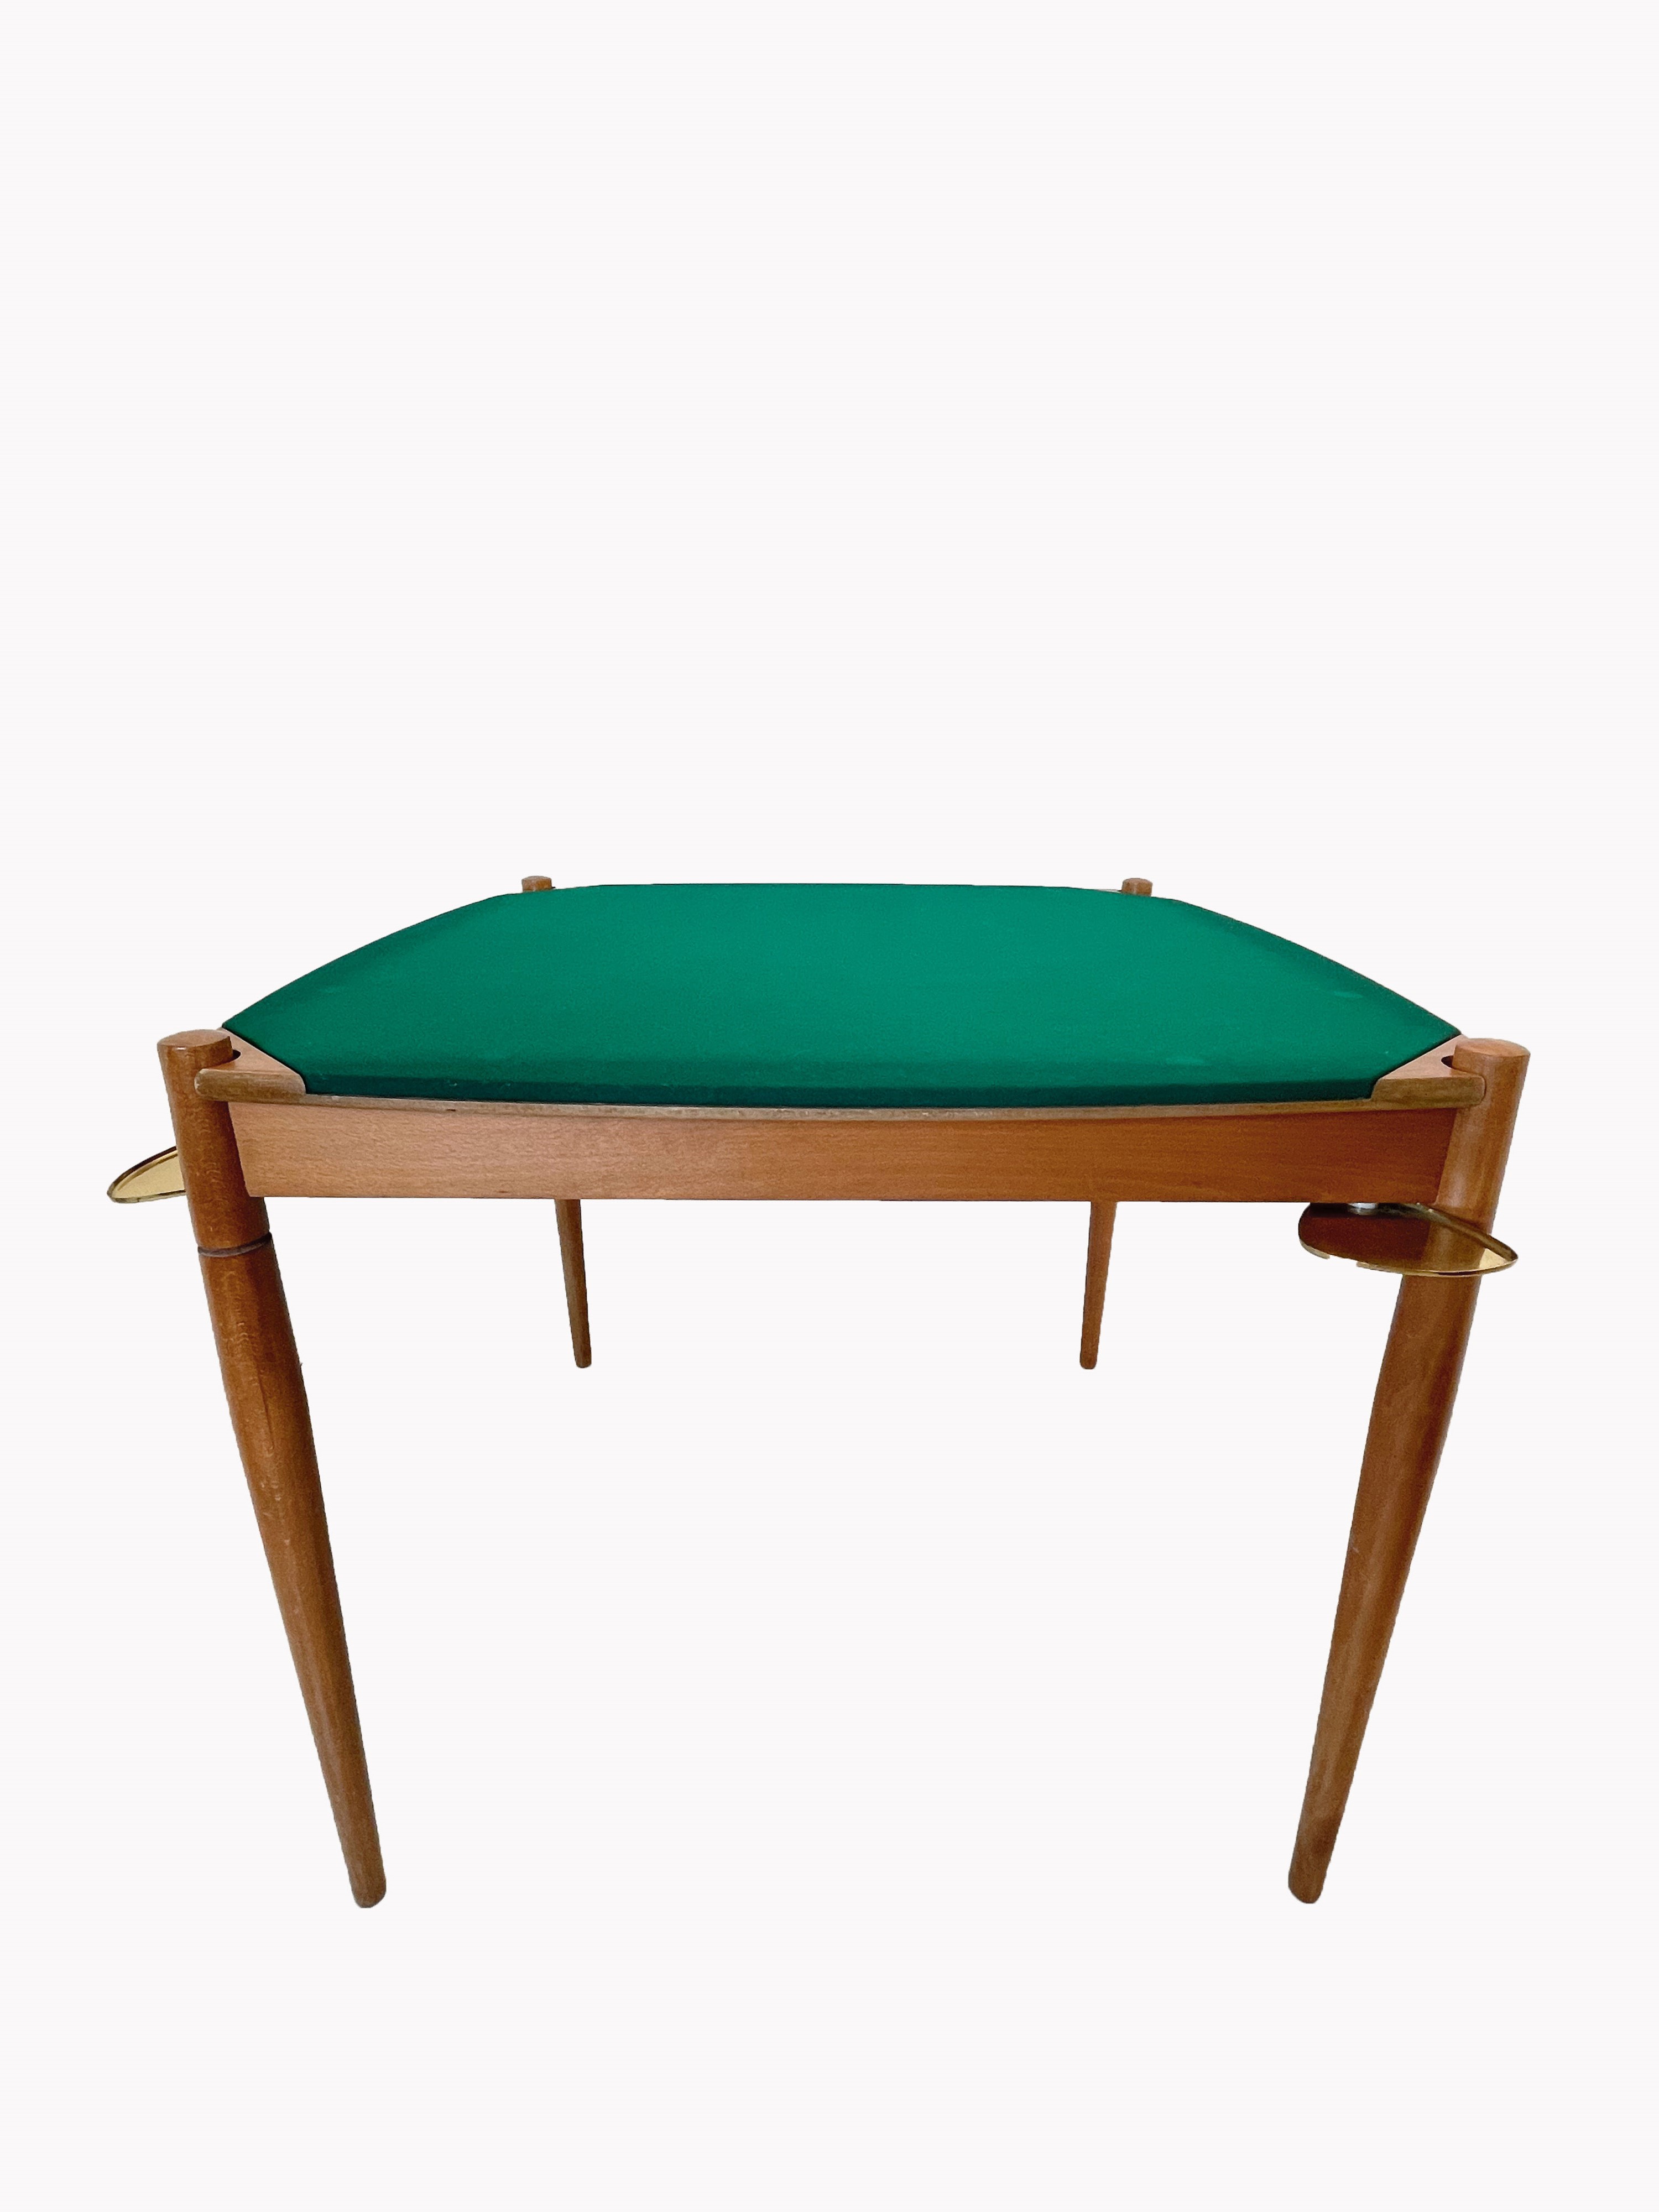 Gio Ponti : Gaming Table Club, original label  - Auction Top Design - LTWID Auction House